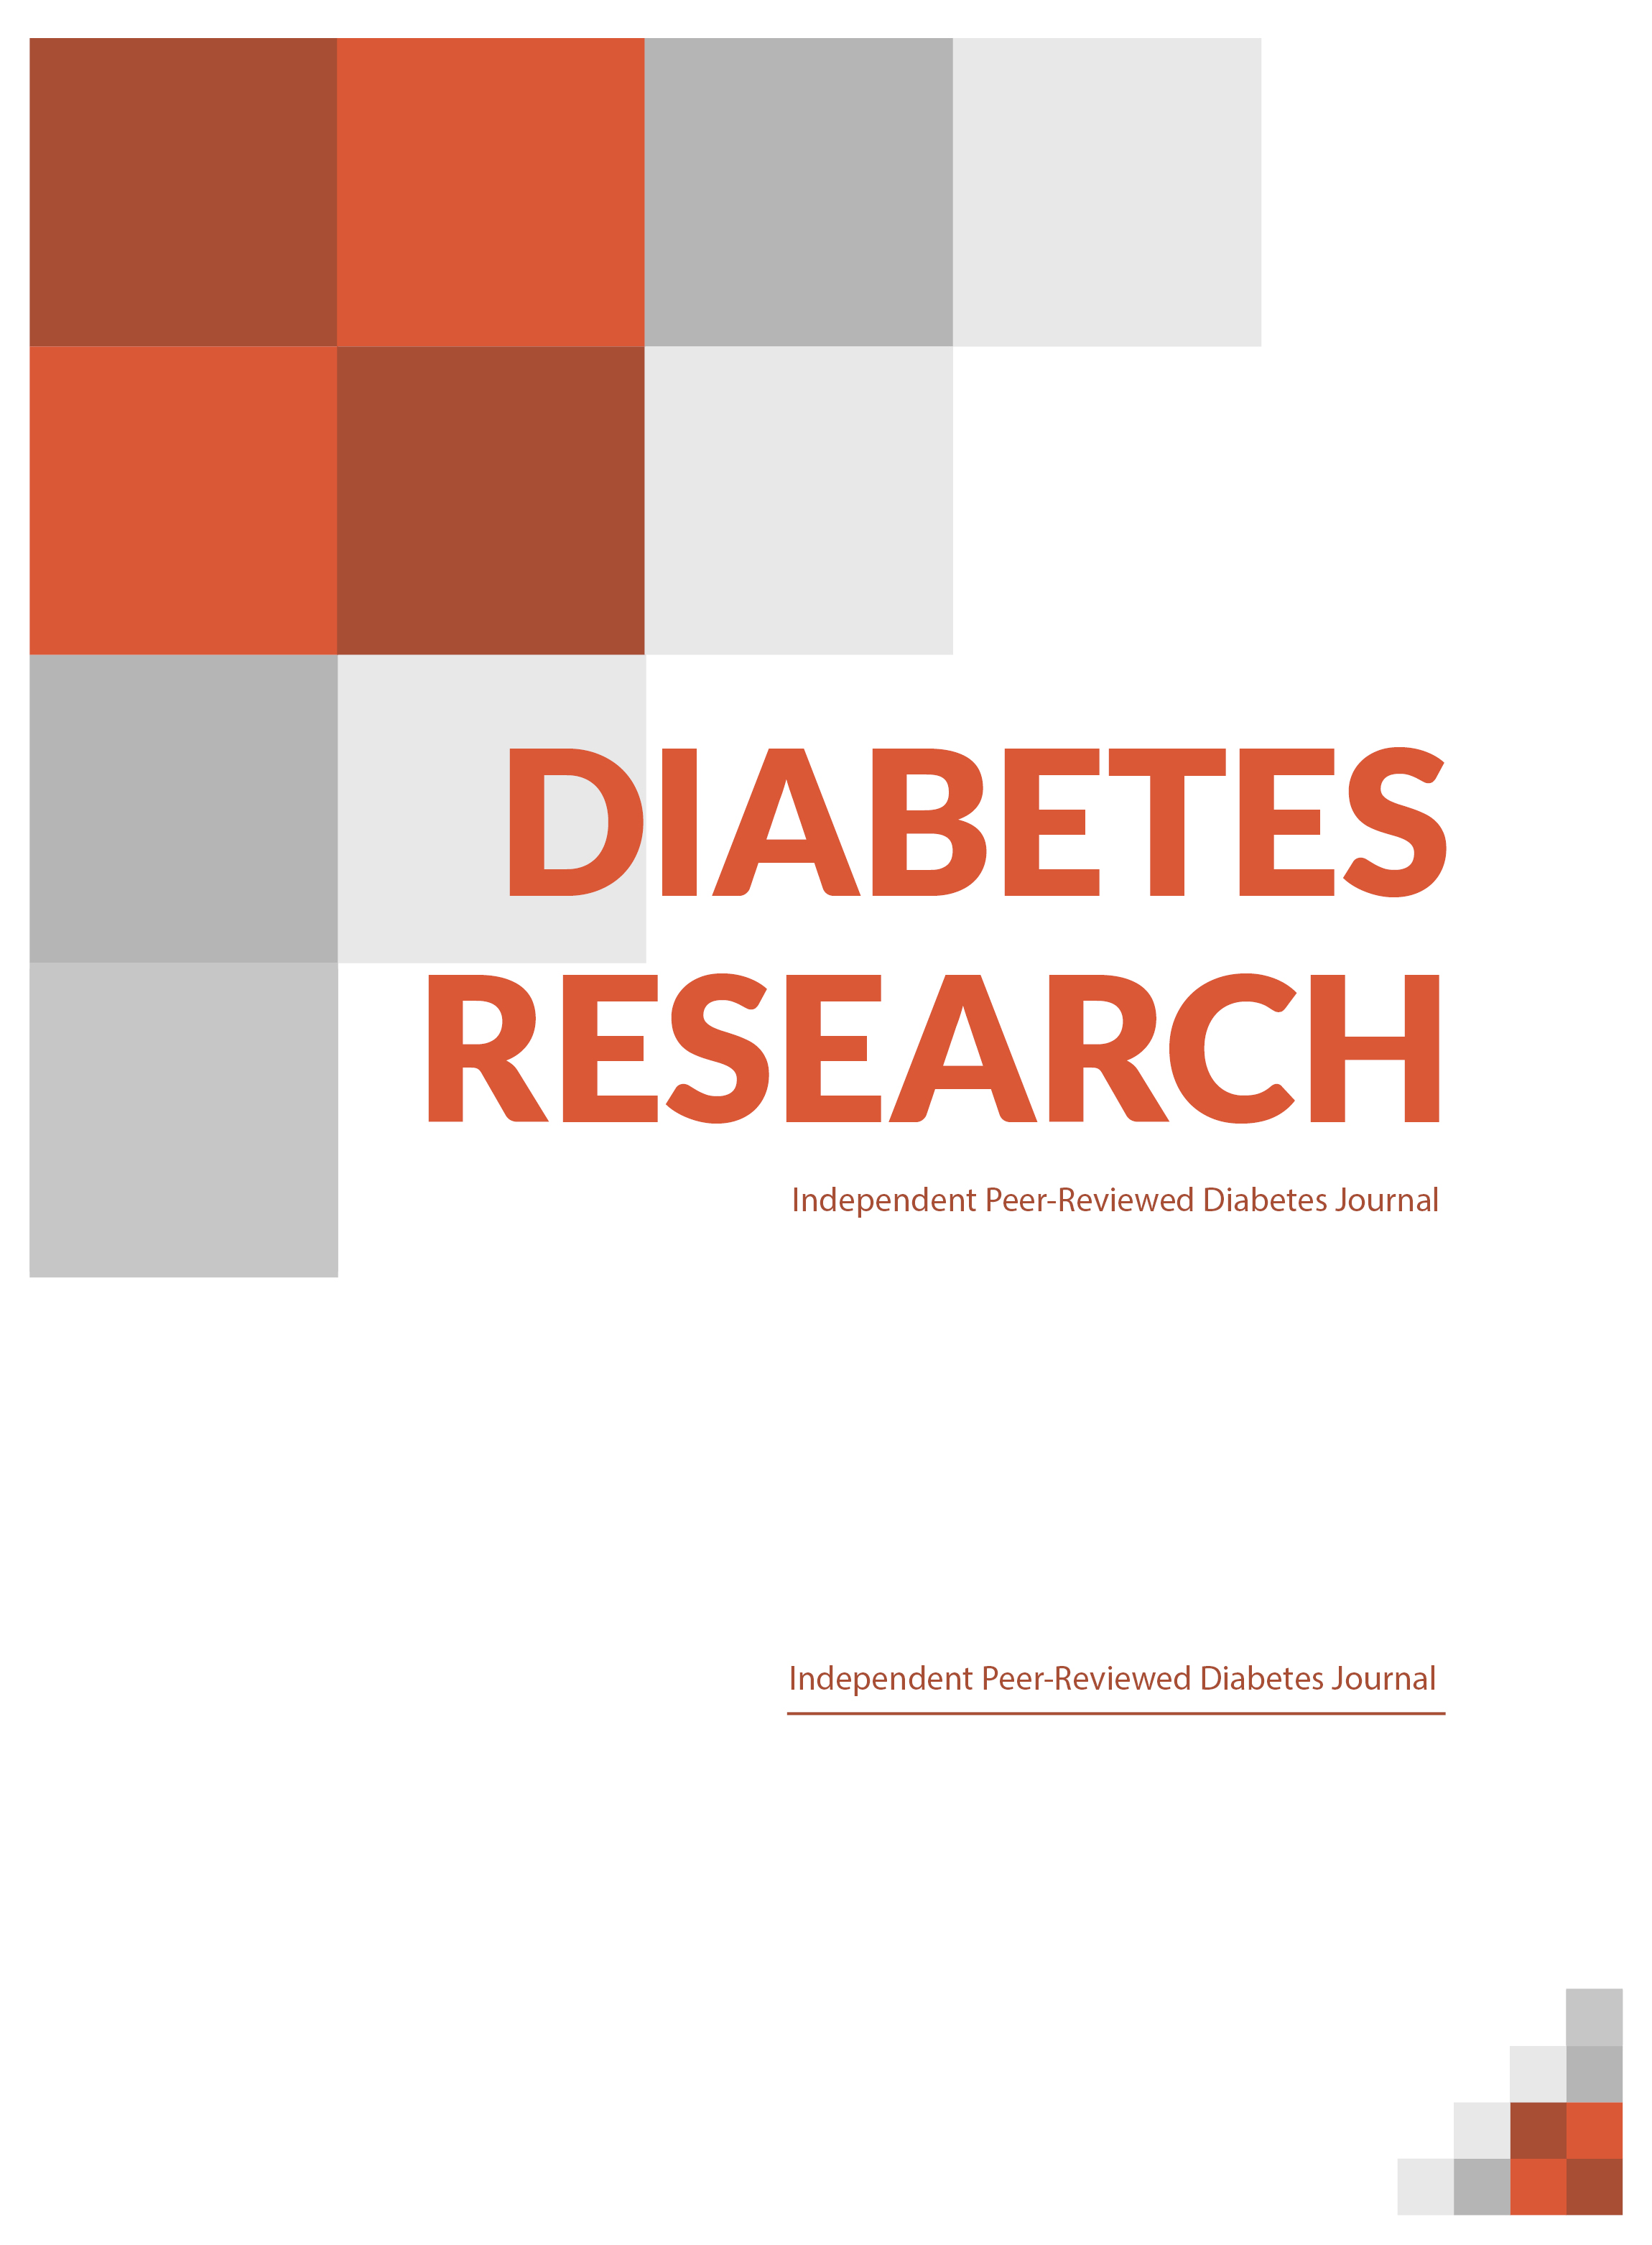 title for diabetes research paper